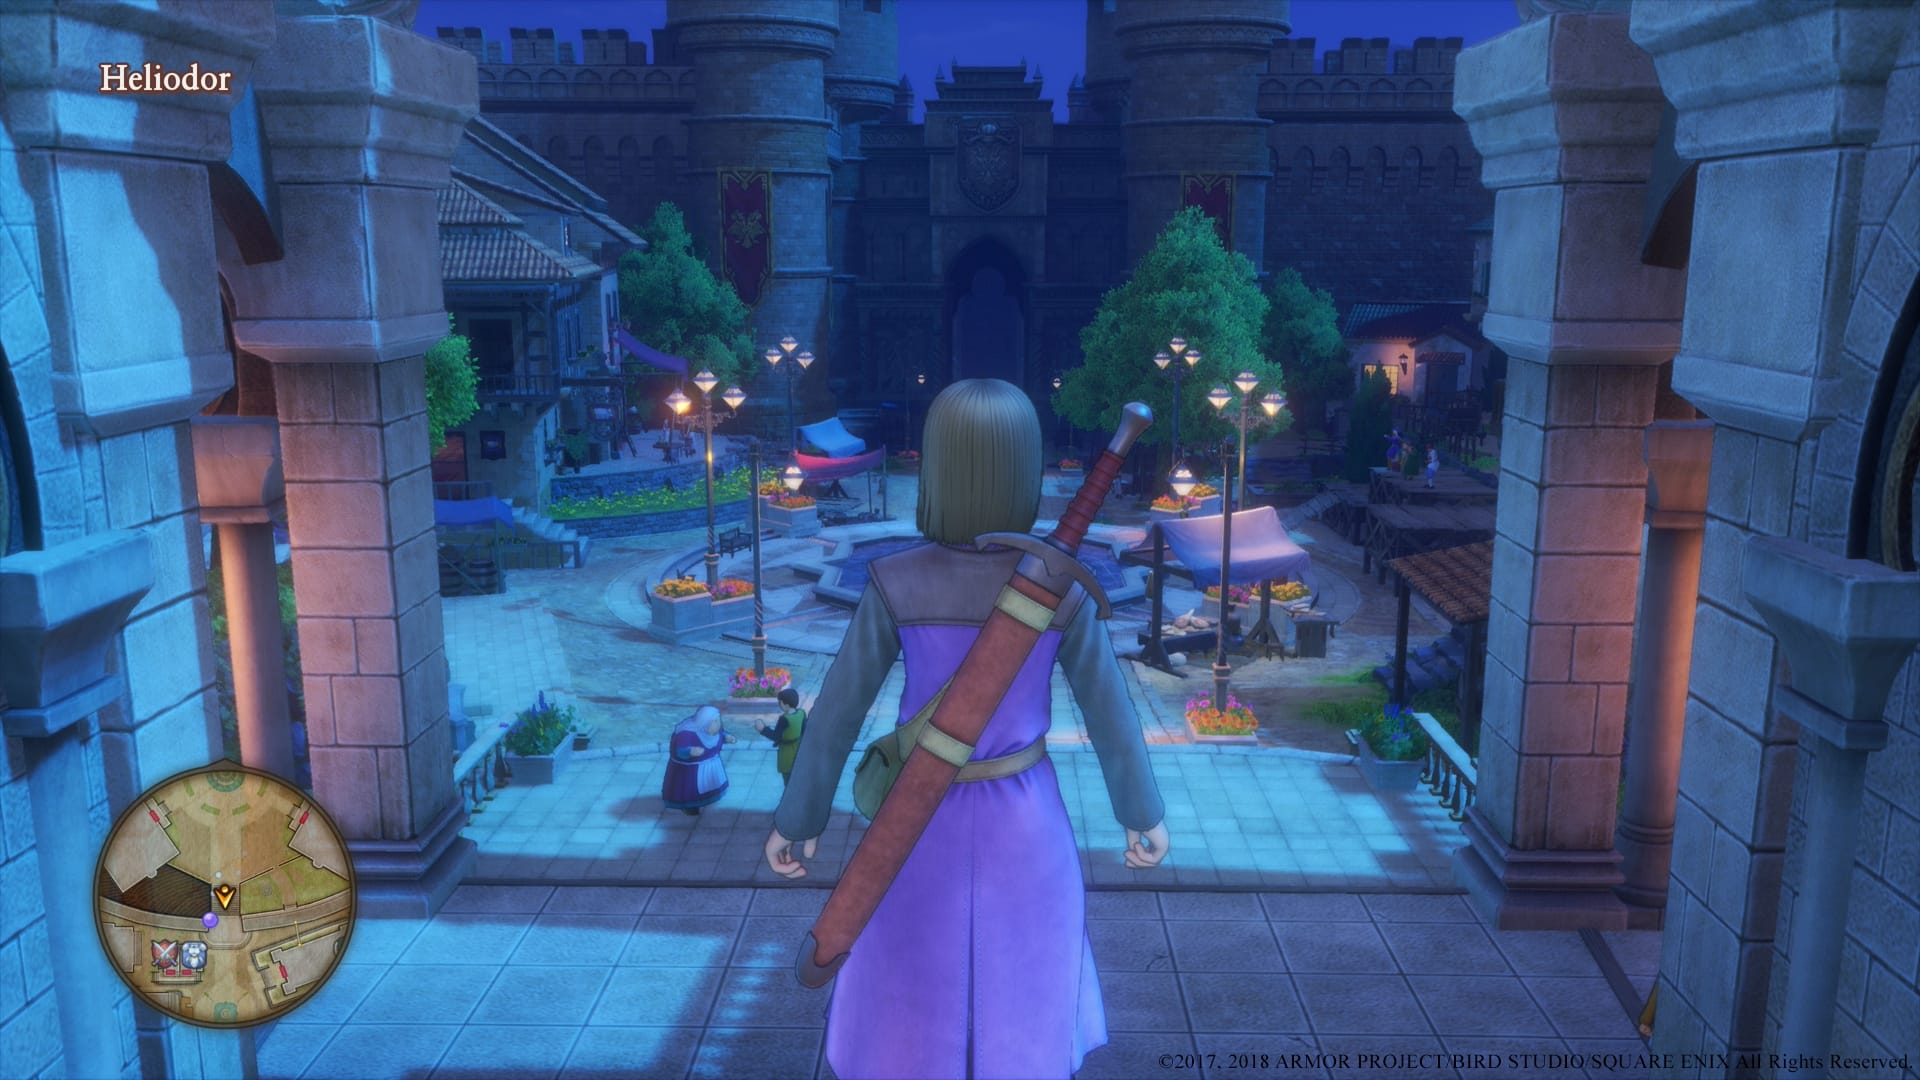 Dragon Quest XI Echoes of an Elusive Age Screen 11 - 1920 x 1080 jpeg 1419kB